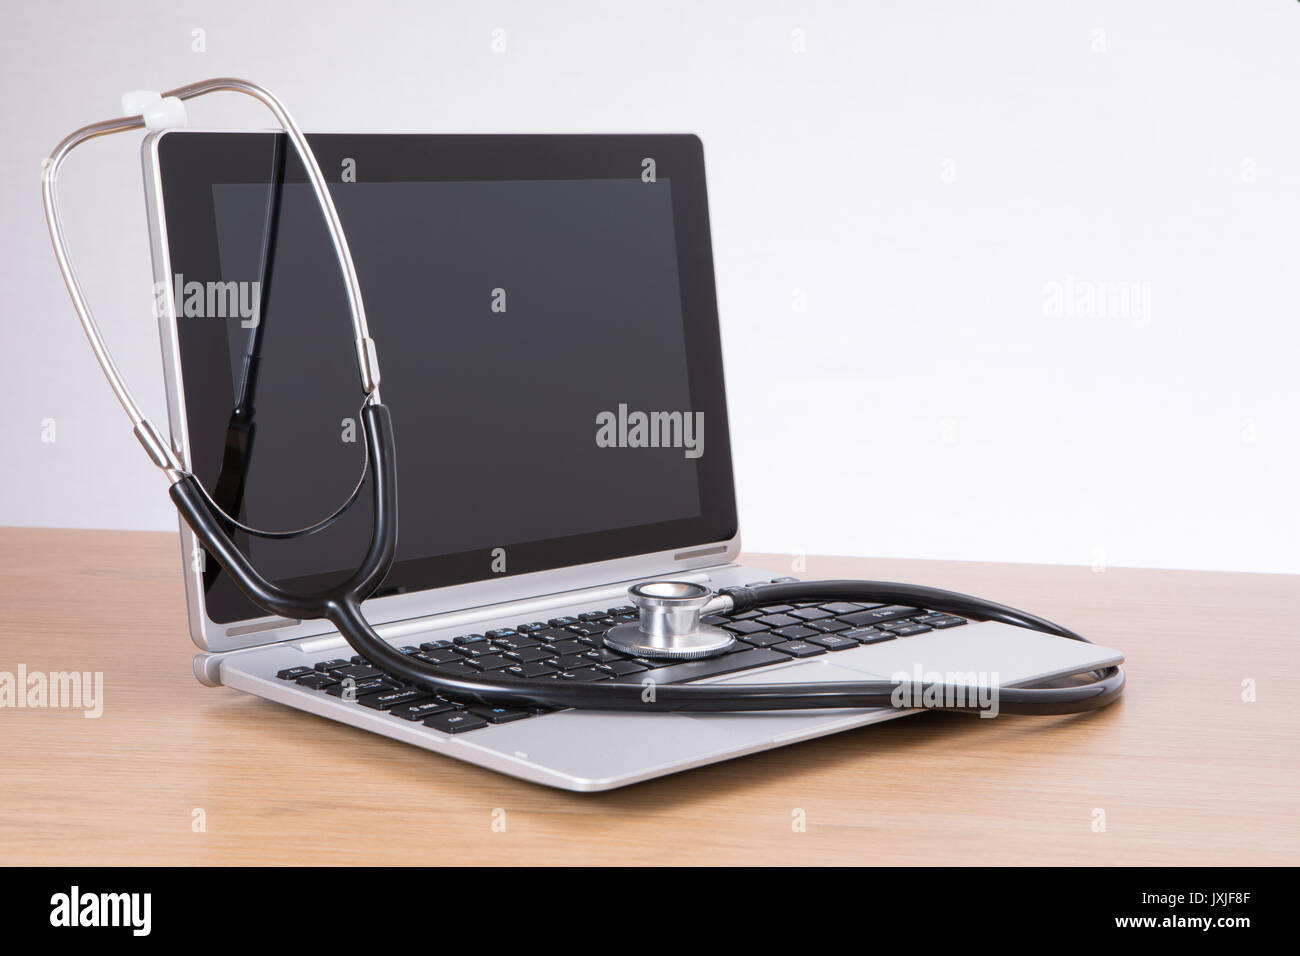 Acoustic stethoscope hanging over laptop screen against wooden desk Stock Photo